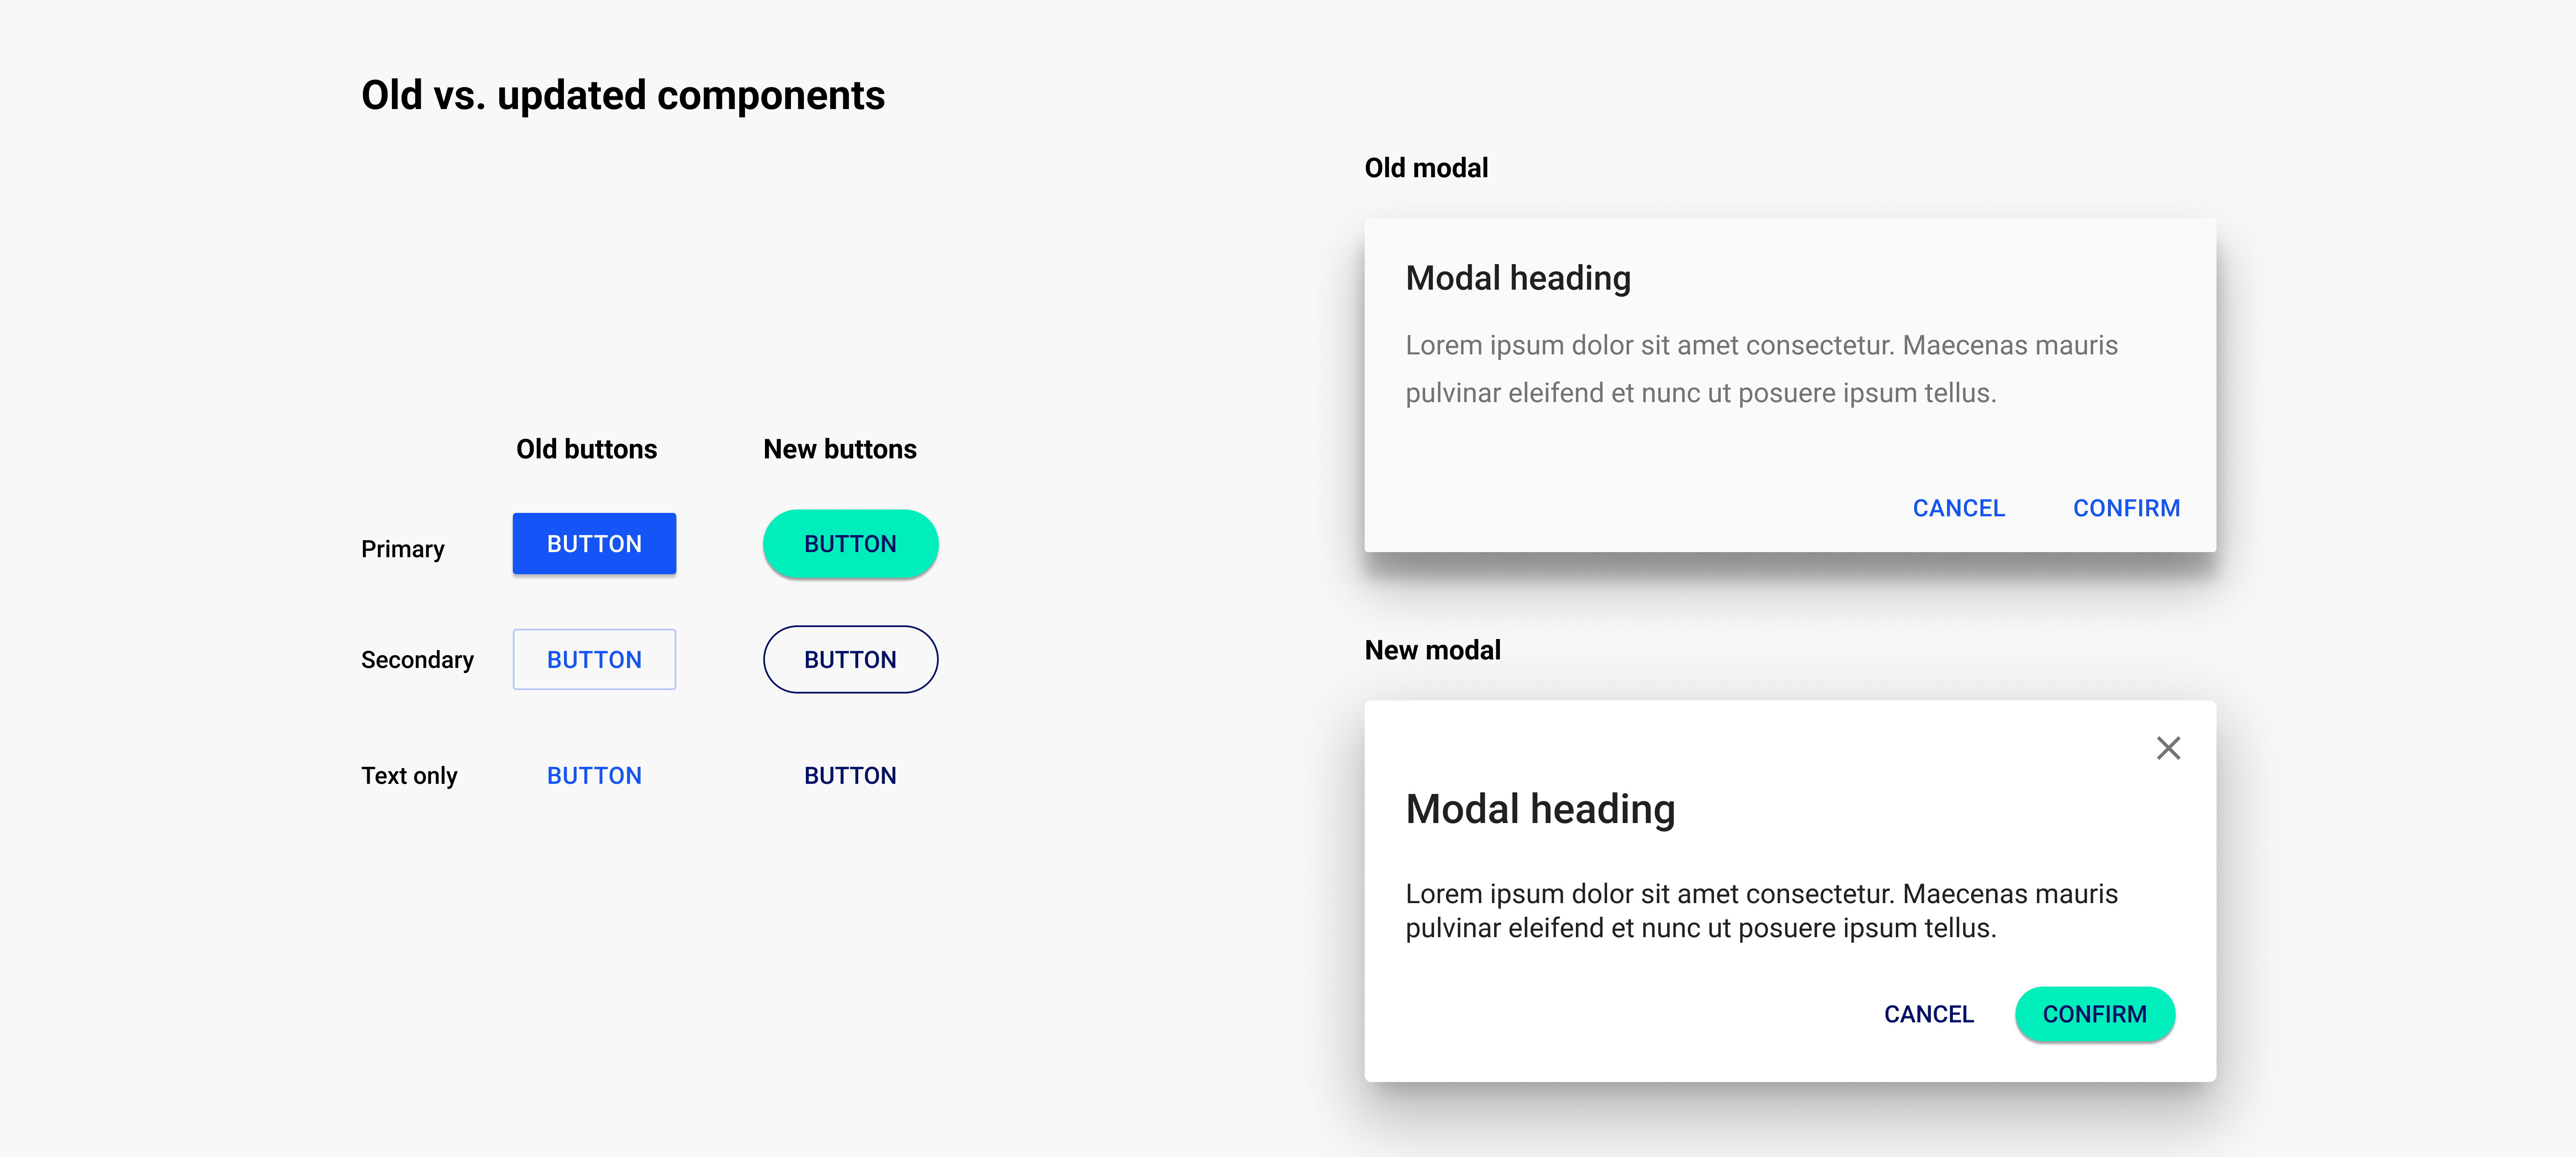 Title: Old vs. updated components. Side by side comparison of components (buttons and modals) with existing and new design systems applied.